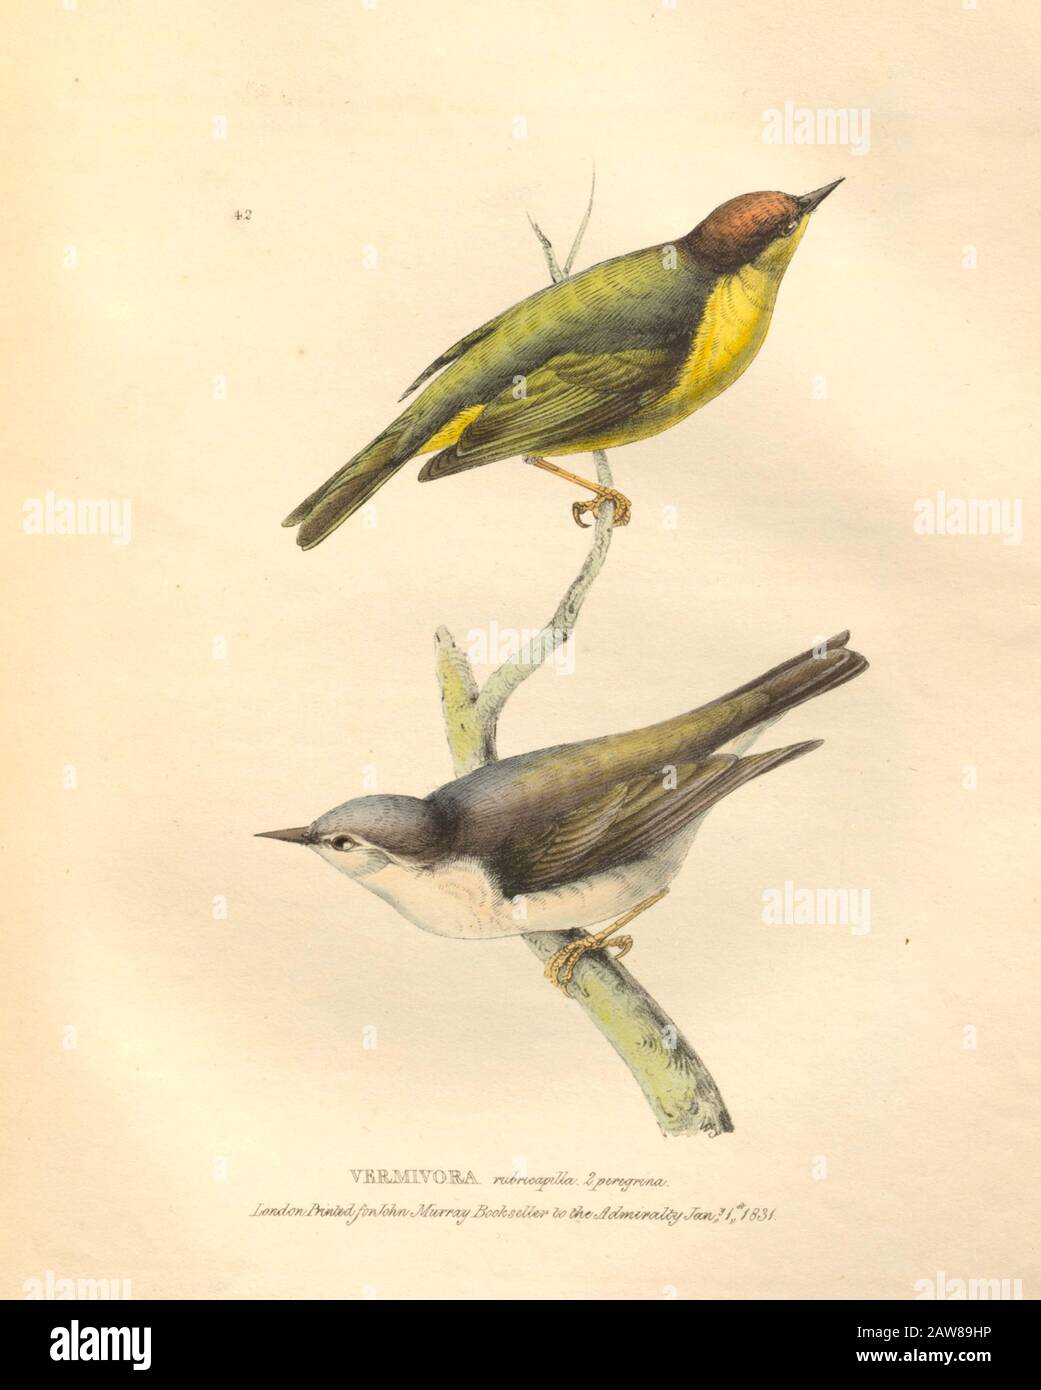 Vermivora (warblers) color plate of North American birds from Fauna boreali-americana; or, The zoology of the northern parts of British America, containing descriptions of the objects of natural history collected on the late northern land expeditions under command of Capt. Sir John Franklin by Richardson, John, Sir, 1787-1865 Published 1829 Stock Photo